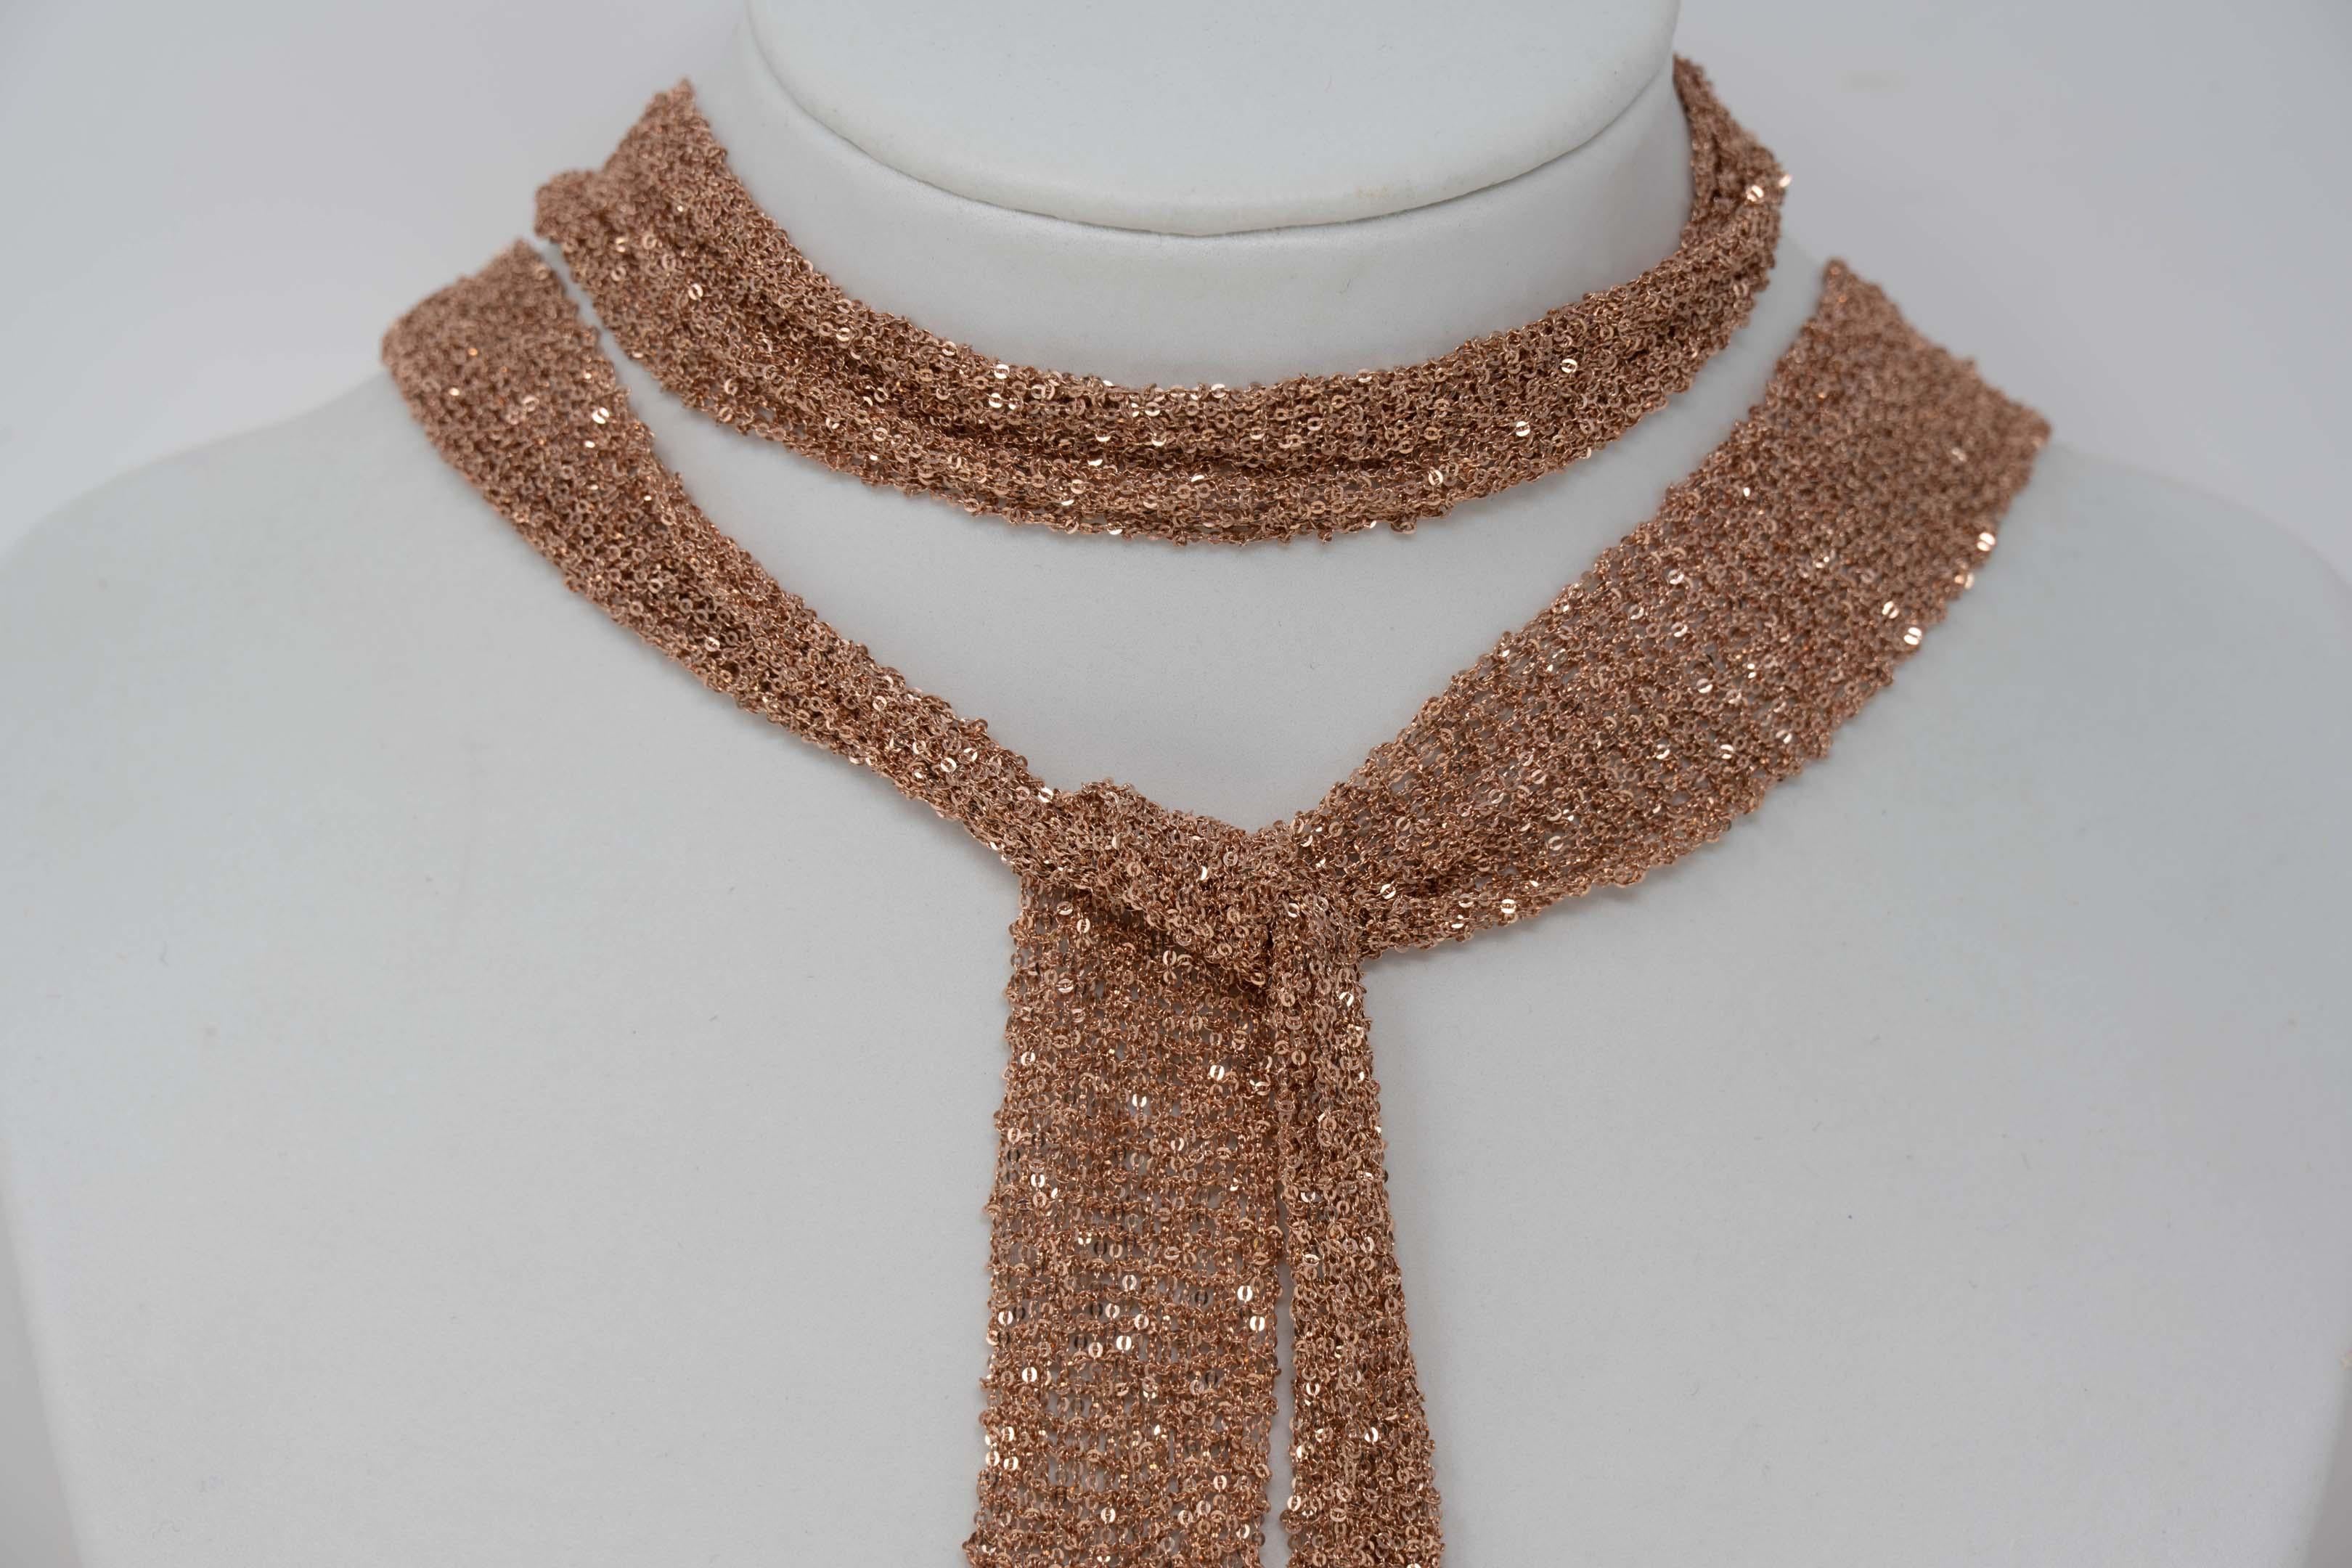 Contemporary 18k rose gold plated 925 silver mesh scarf by Stevie Wren. Measures 38 inches long x 1 inches wide. Stamped 925 with maker mark 5. In good condition.
